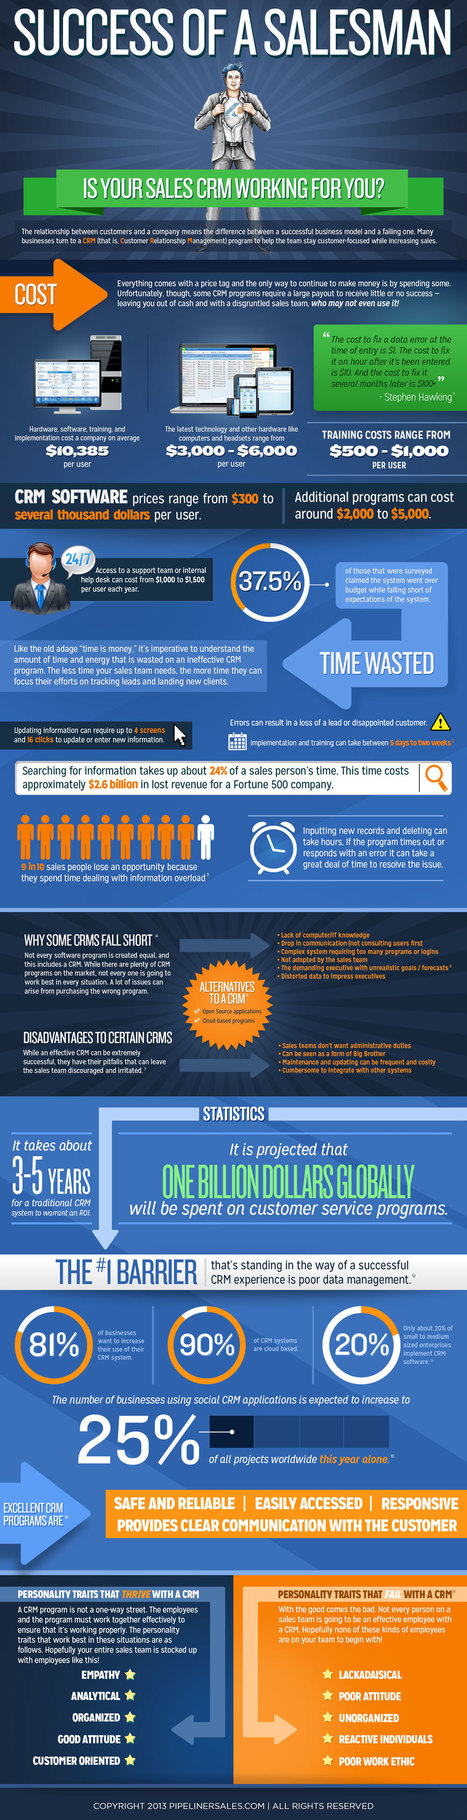 Infographic: The Success of a Salesman | Pipeliner CRM | #TheMarketingAutomationAlert | Shipley Asia Pacific | Scoop.it